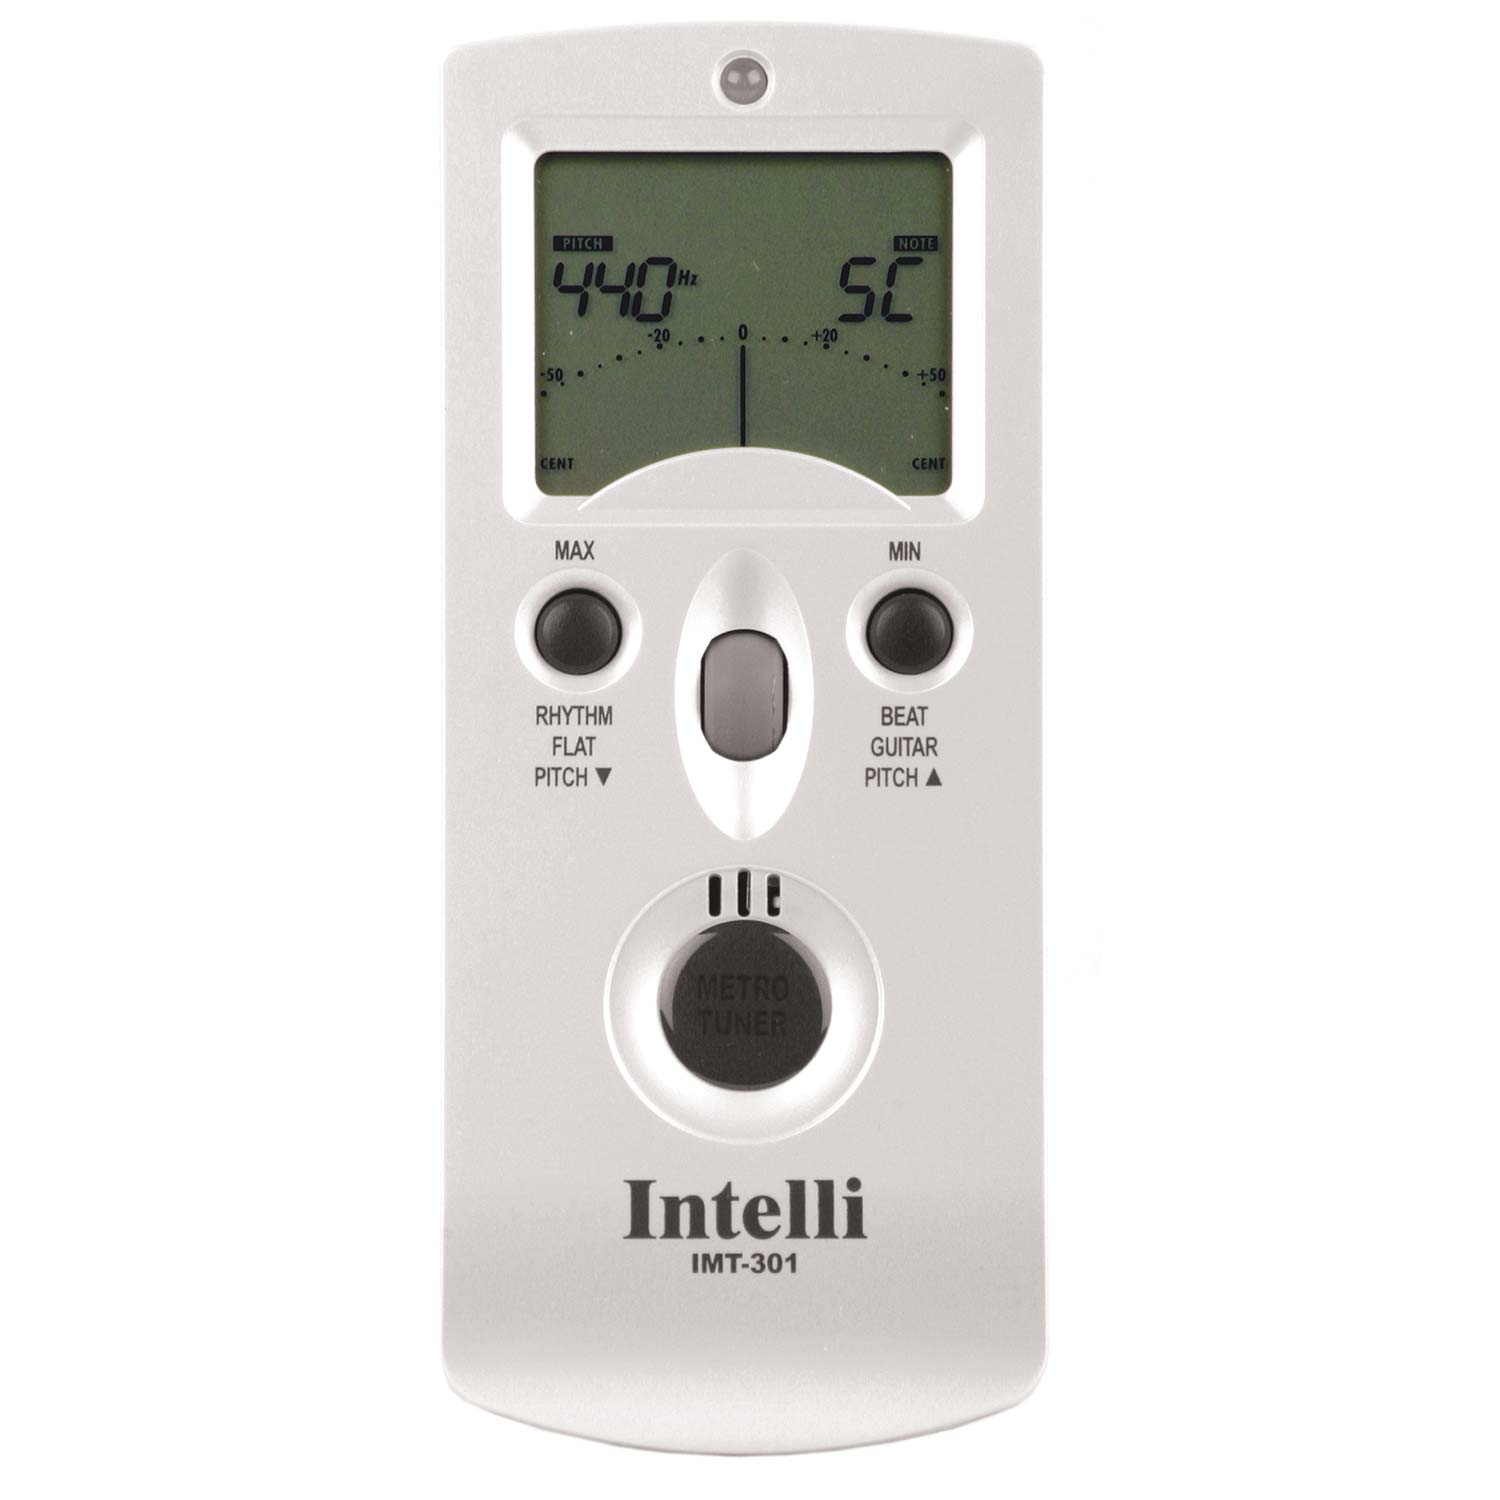 Intelli - IMT-301 Metronome, Chromatic Tuner & Pitch Generator with Thermo-Hygrometer